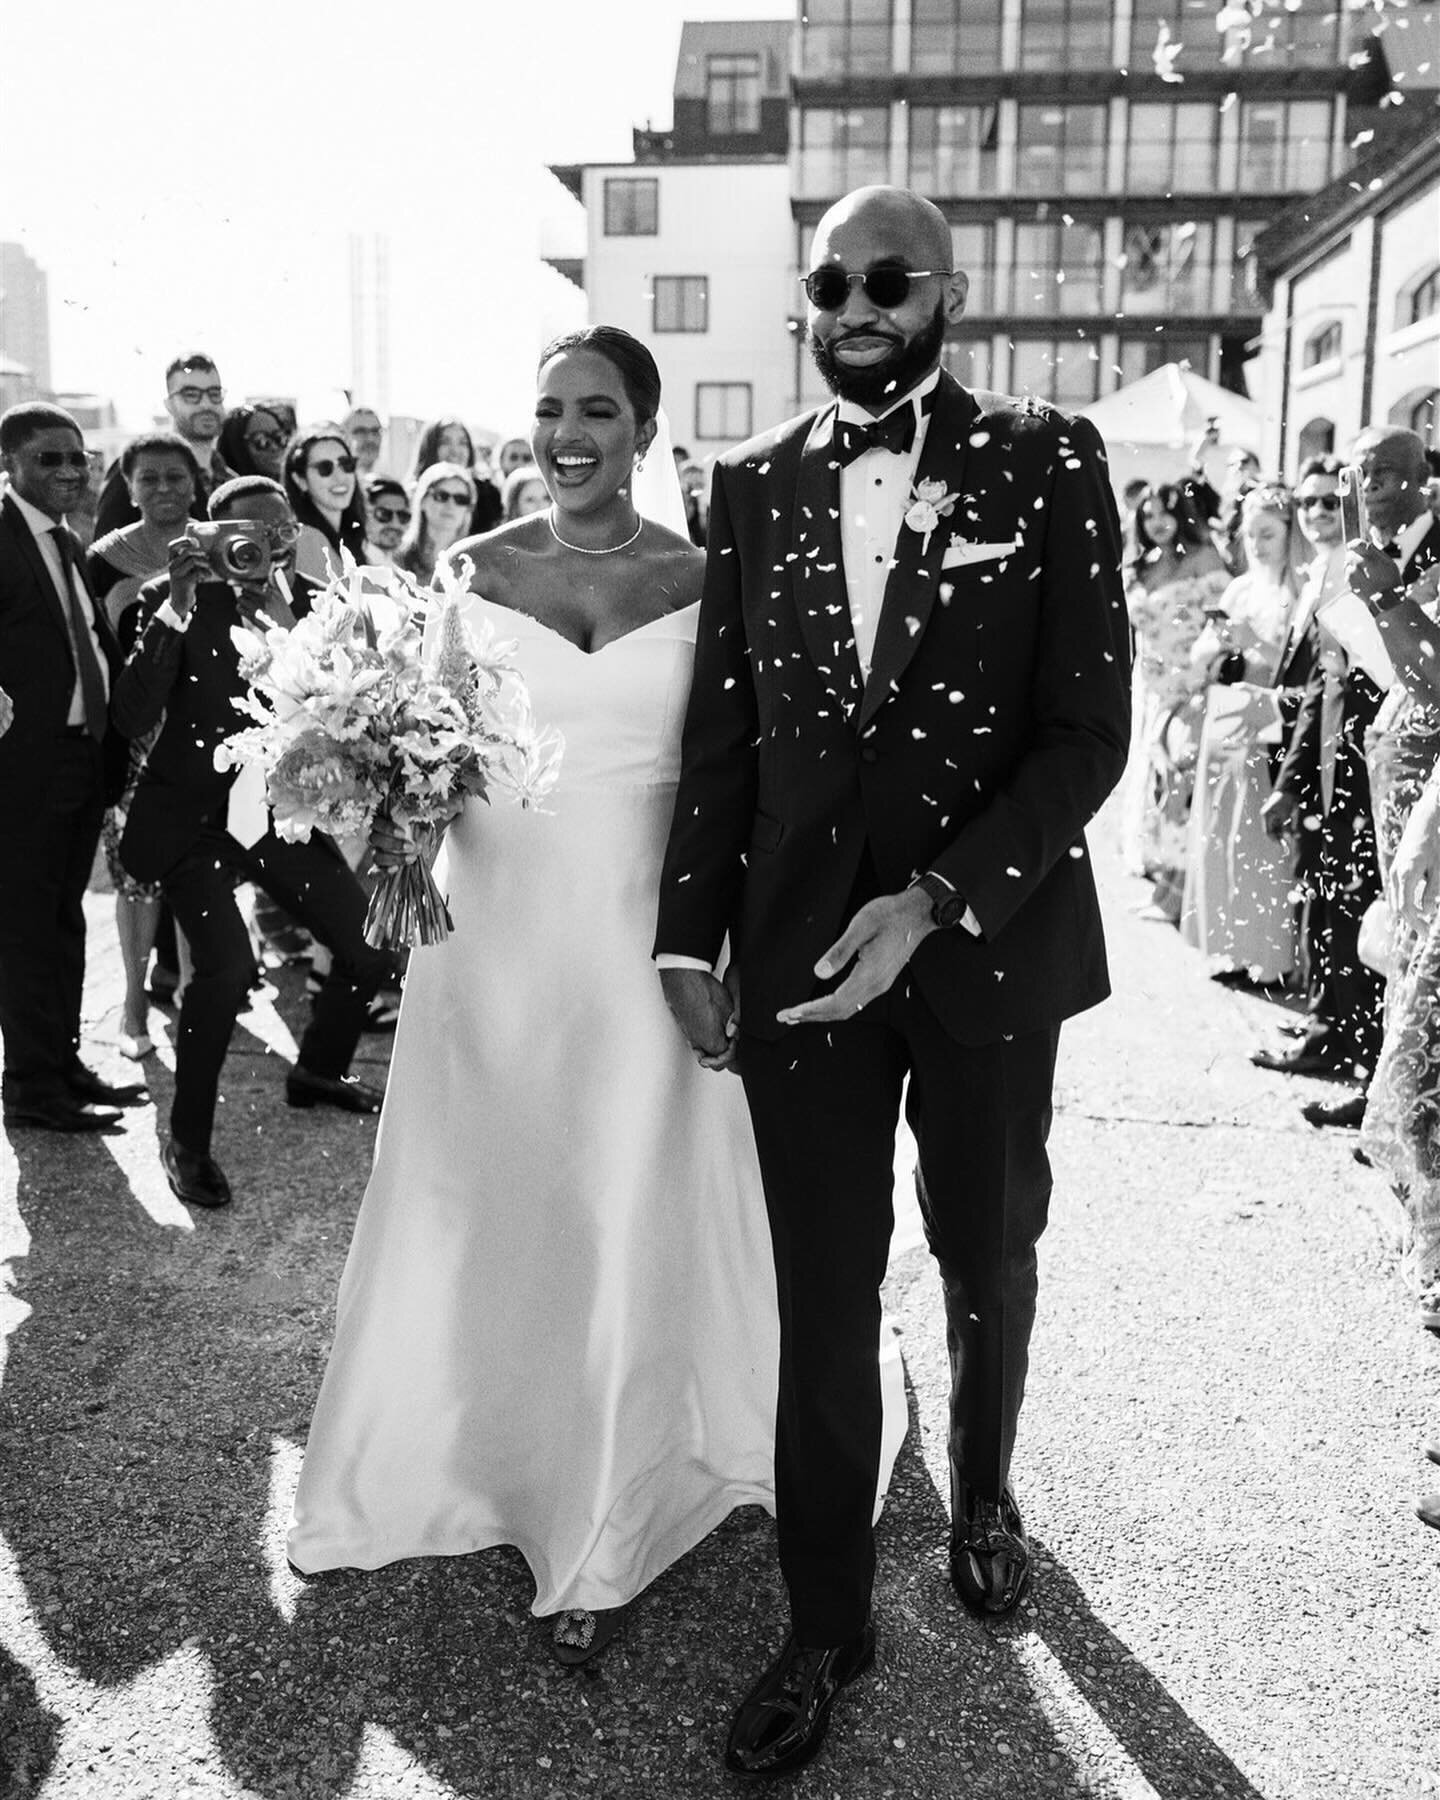 LONDON CALLING // it goes without saying we LOVE seeing our real brides tie the knot in London! Real bride Nagla wore the Hadid dress from @aeslingbride for her stylish wedding at @trinitybuoywharf  in East London. 💕
Photography by @kernwellphoto